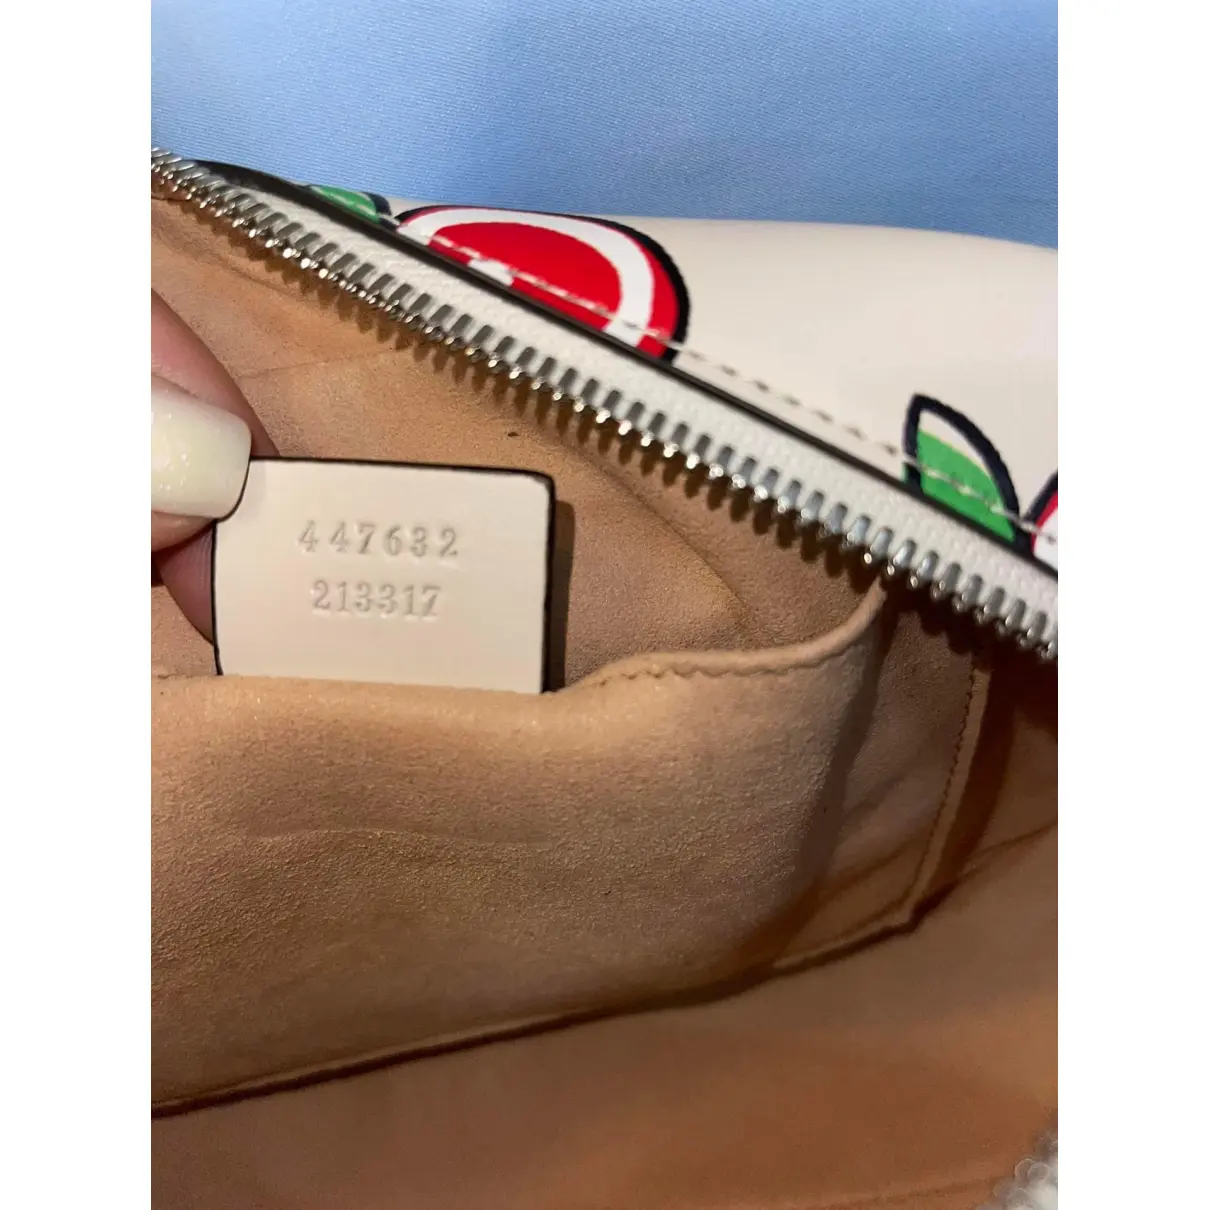 GG Marmont leather crossbody bag Gucci